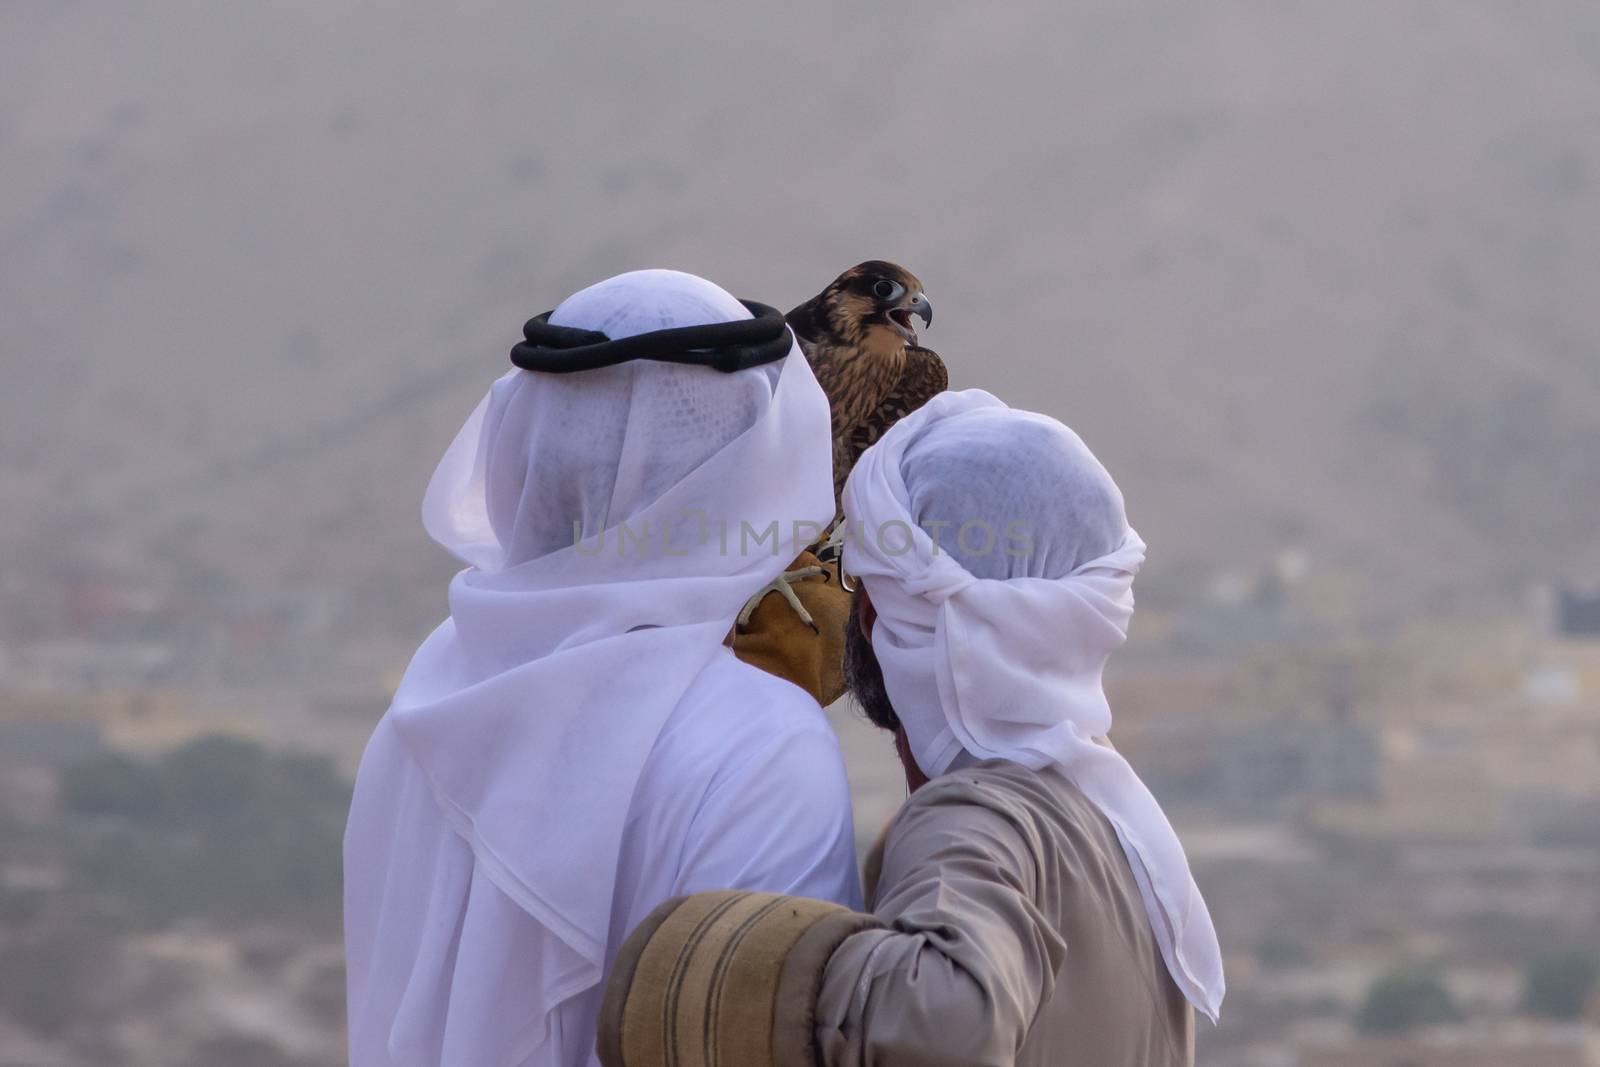 A pair of Emirati falconers hold a peregrine falcon  (Falco peregrinus) in the United Arab Emirates (UAE) a culture and tradition in the Middle East.